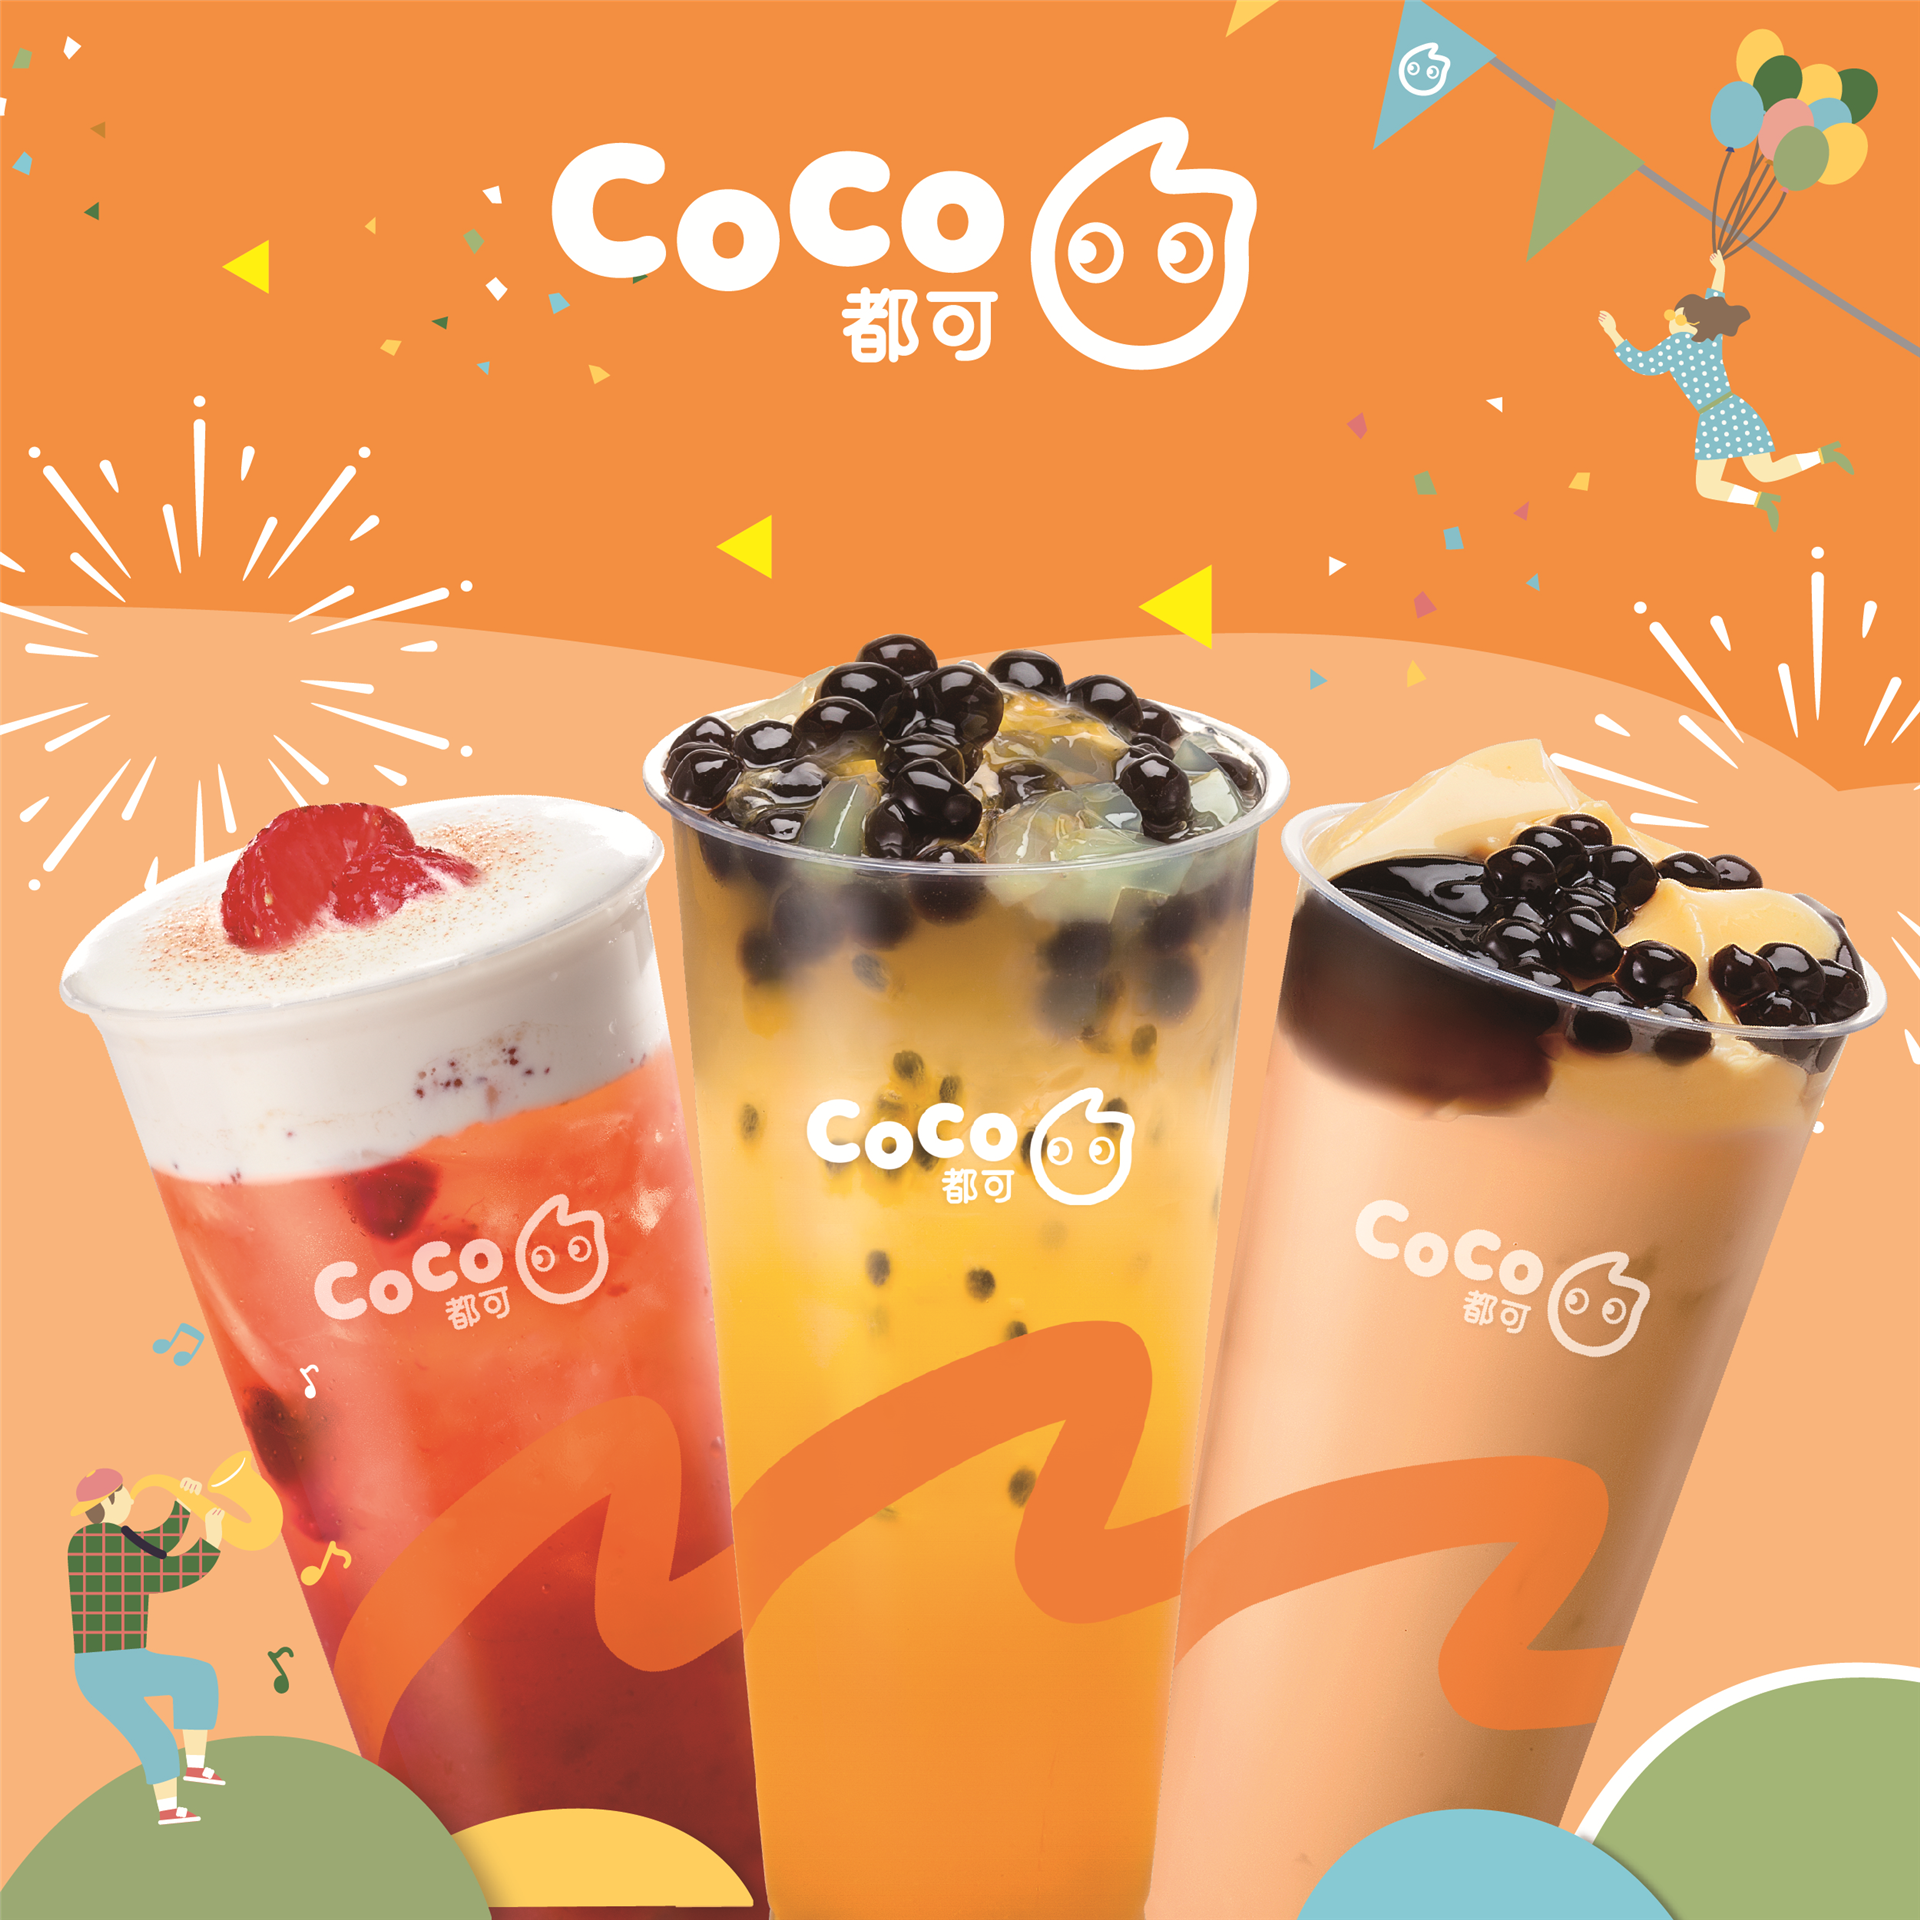 Three types of CoCo boba tea drinks in the orange, festive background.